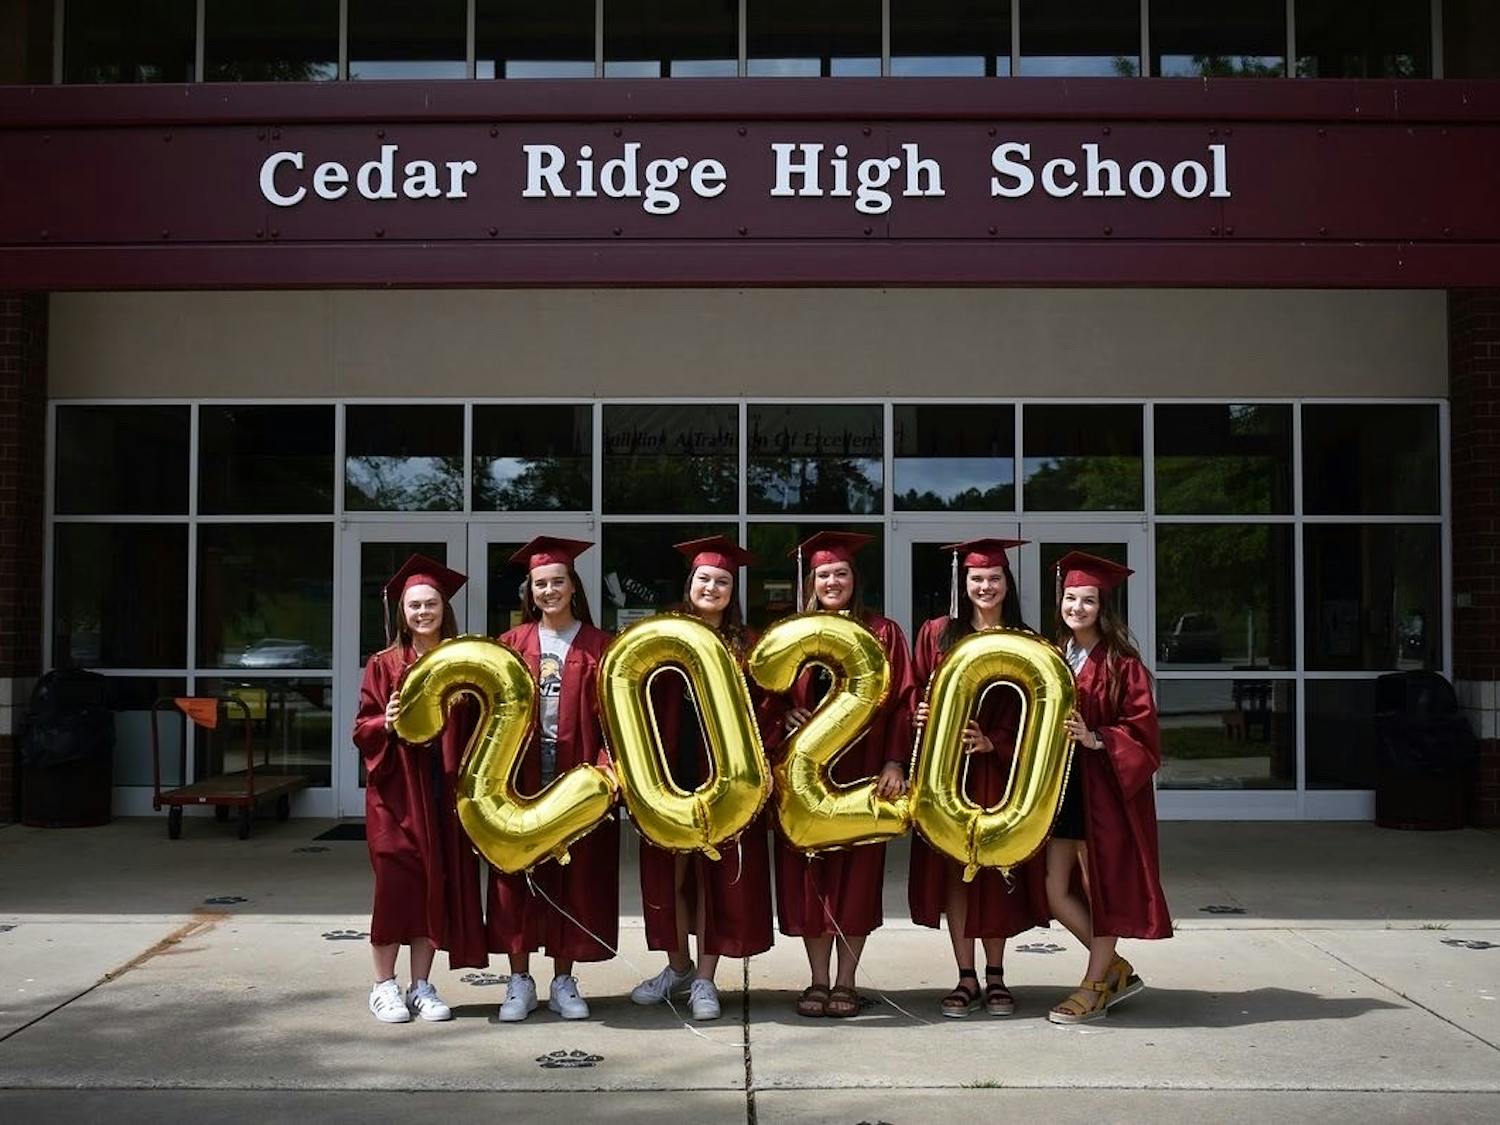 Cedar Ridge Class of 2020 graduates stand in front of Cedar Ridge High School on Friday, May 15, 2020. In lieu of an in-person graduation, the school has proposed a "drive-thru" graduation ceremony, a solution that many students are opposed to. Photo courtesy of Caitlyn Loyd and photographer Shili Quade